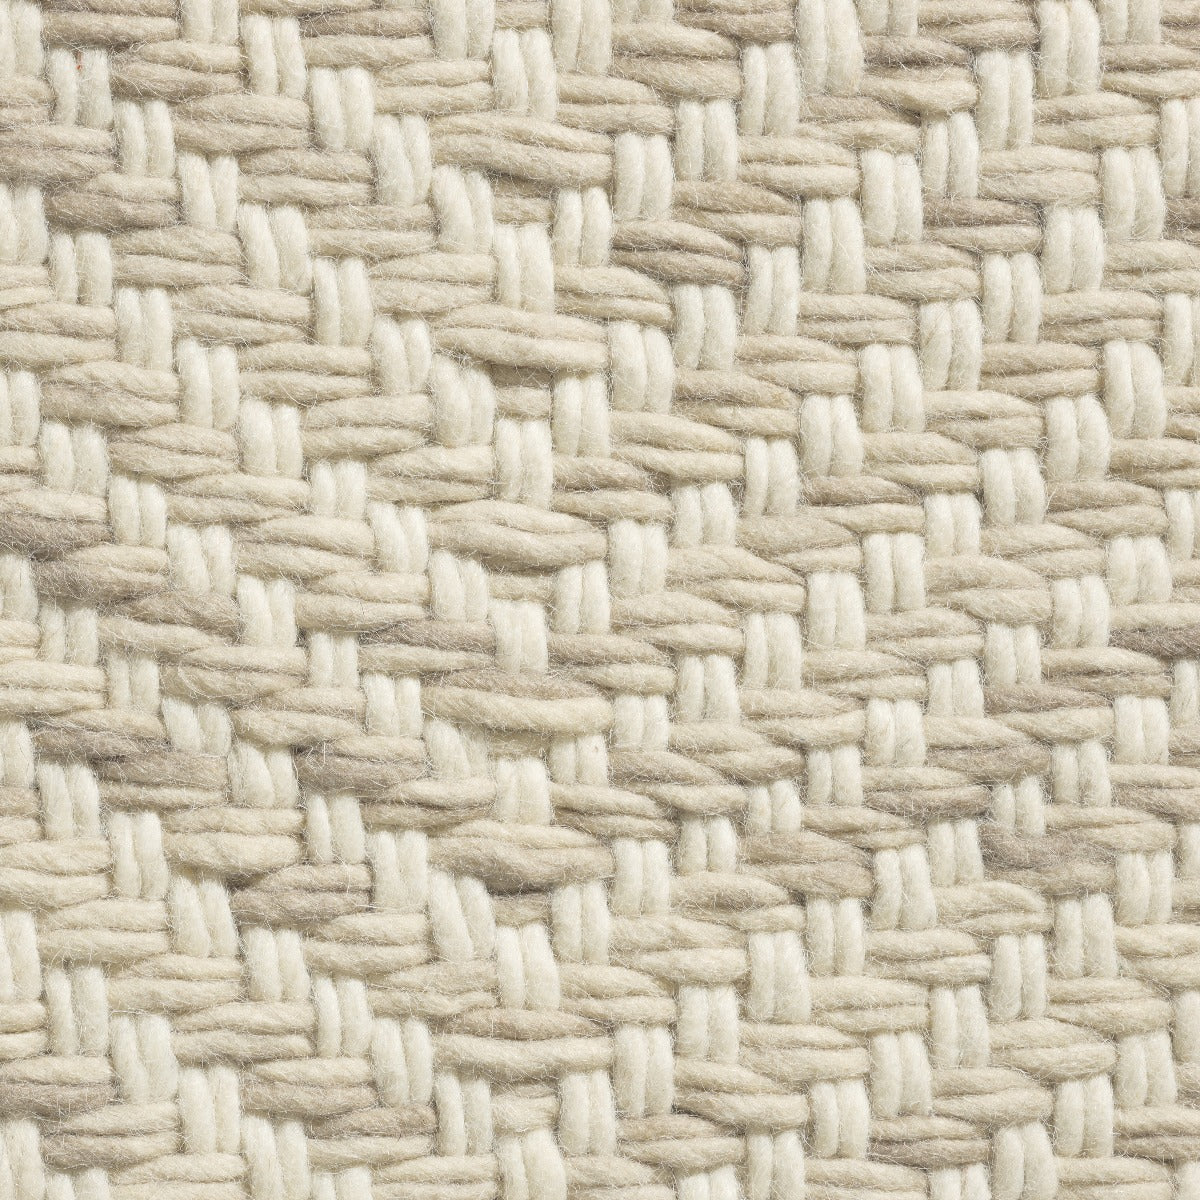 Woven beige brink and campman rug